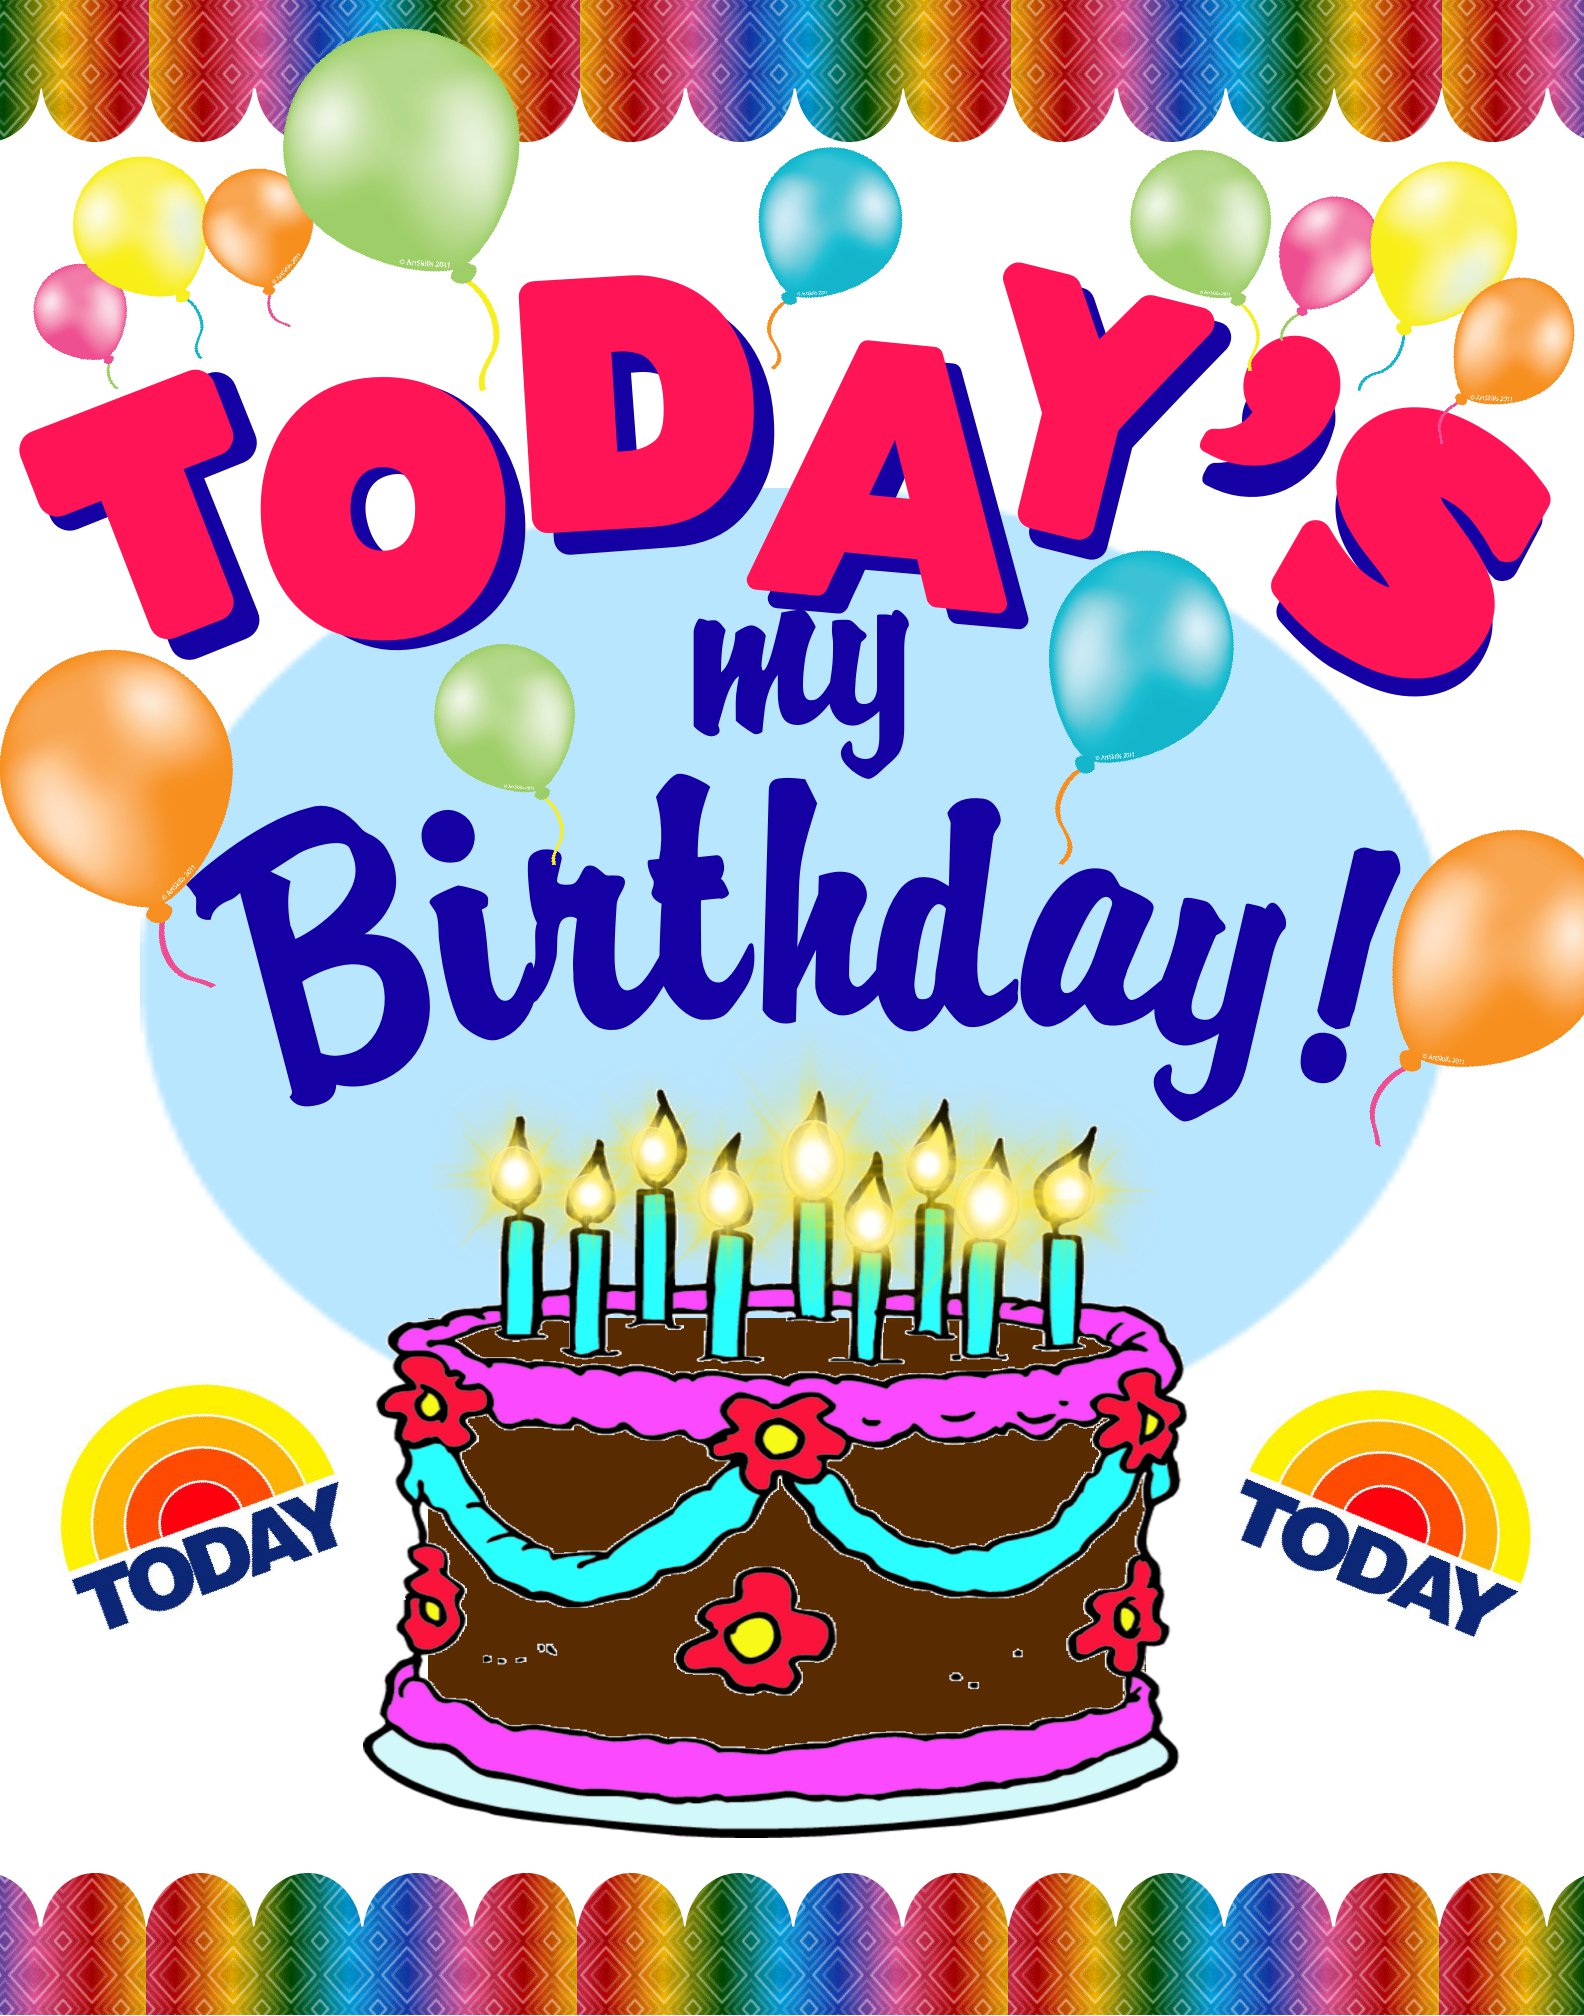 today-birthday-pic-download-clip-art-library